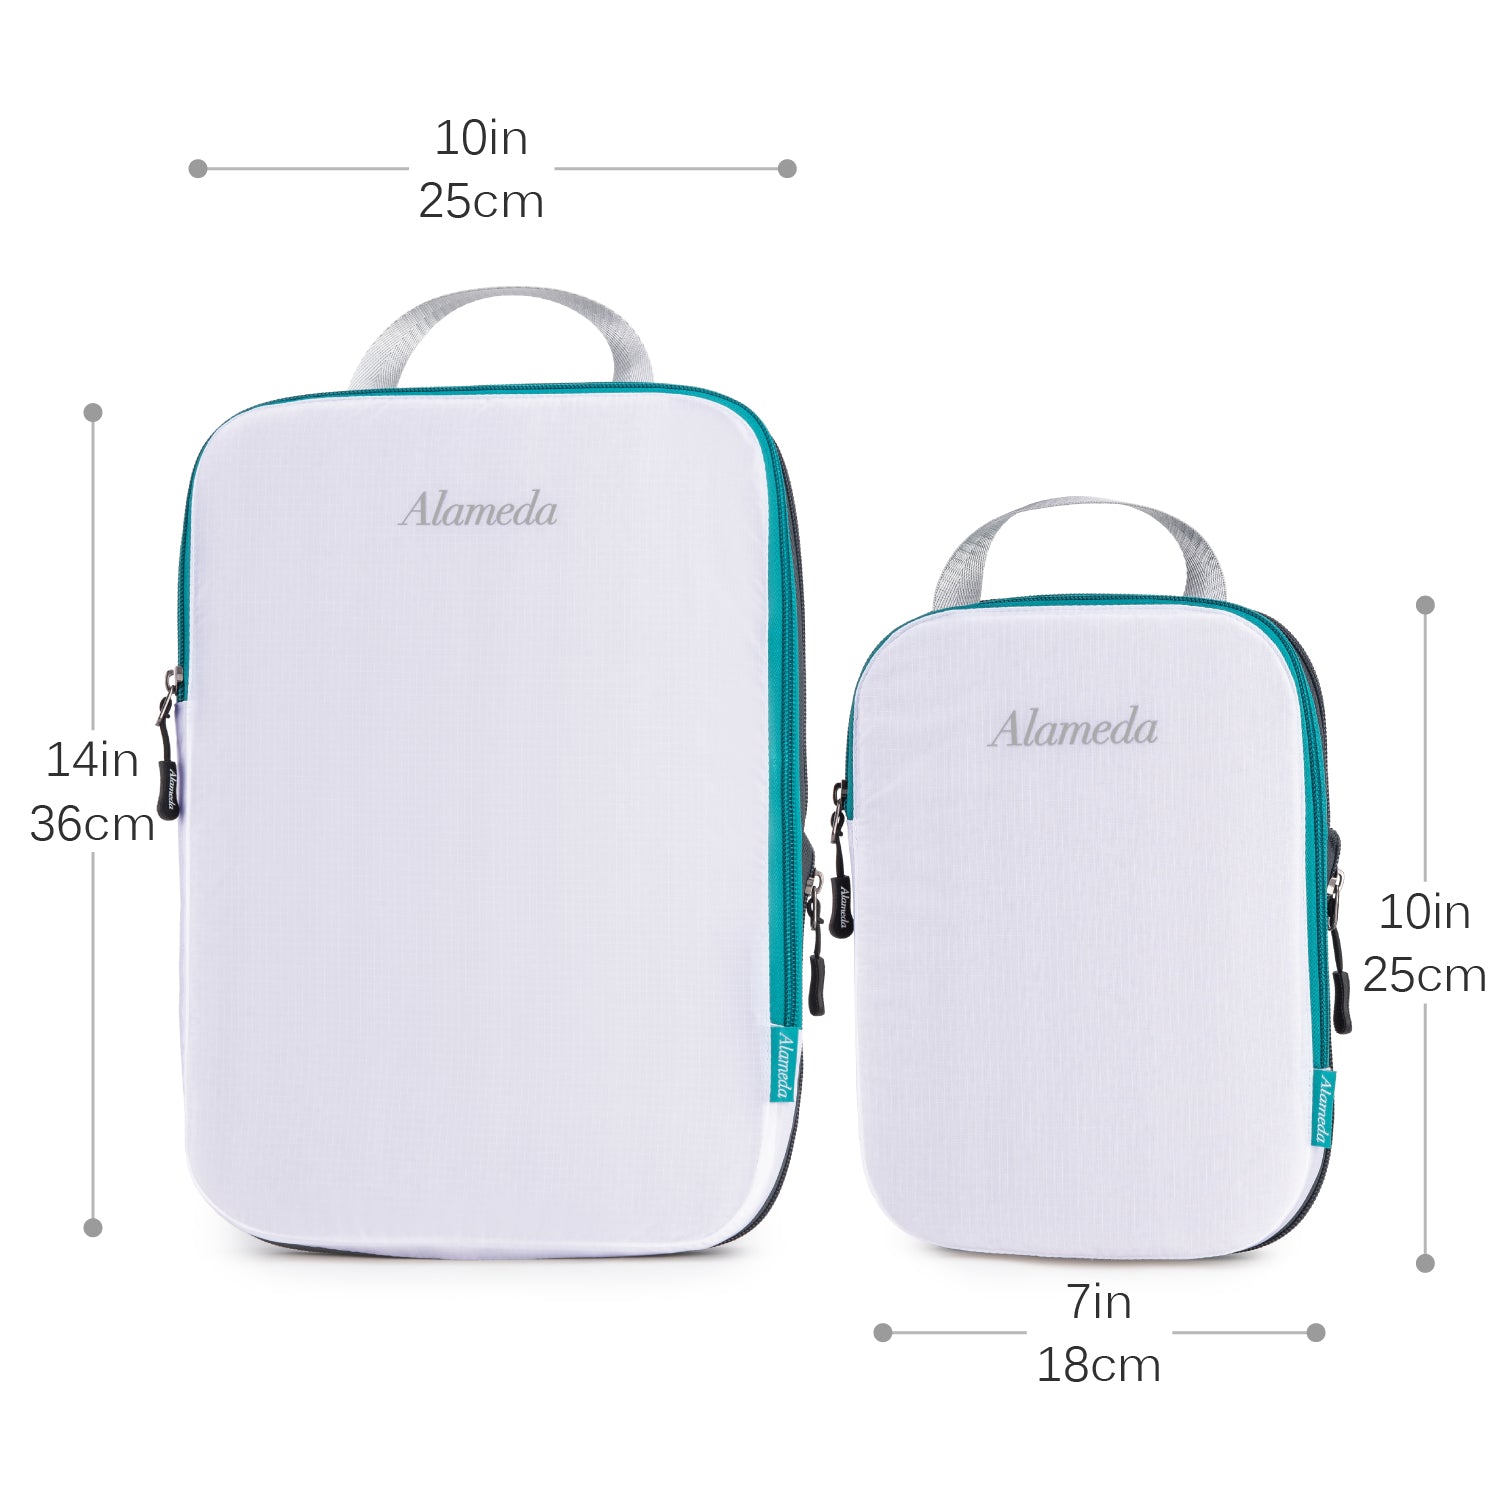 Miamica Packing Cubes Set of 3 - Blue Wander Clear Design